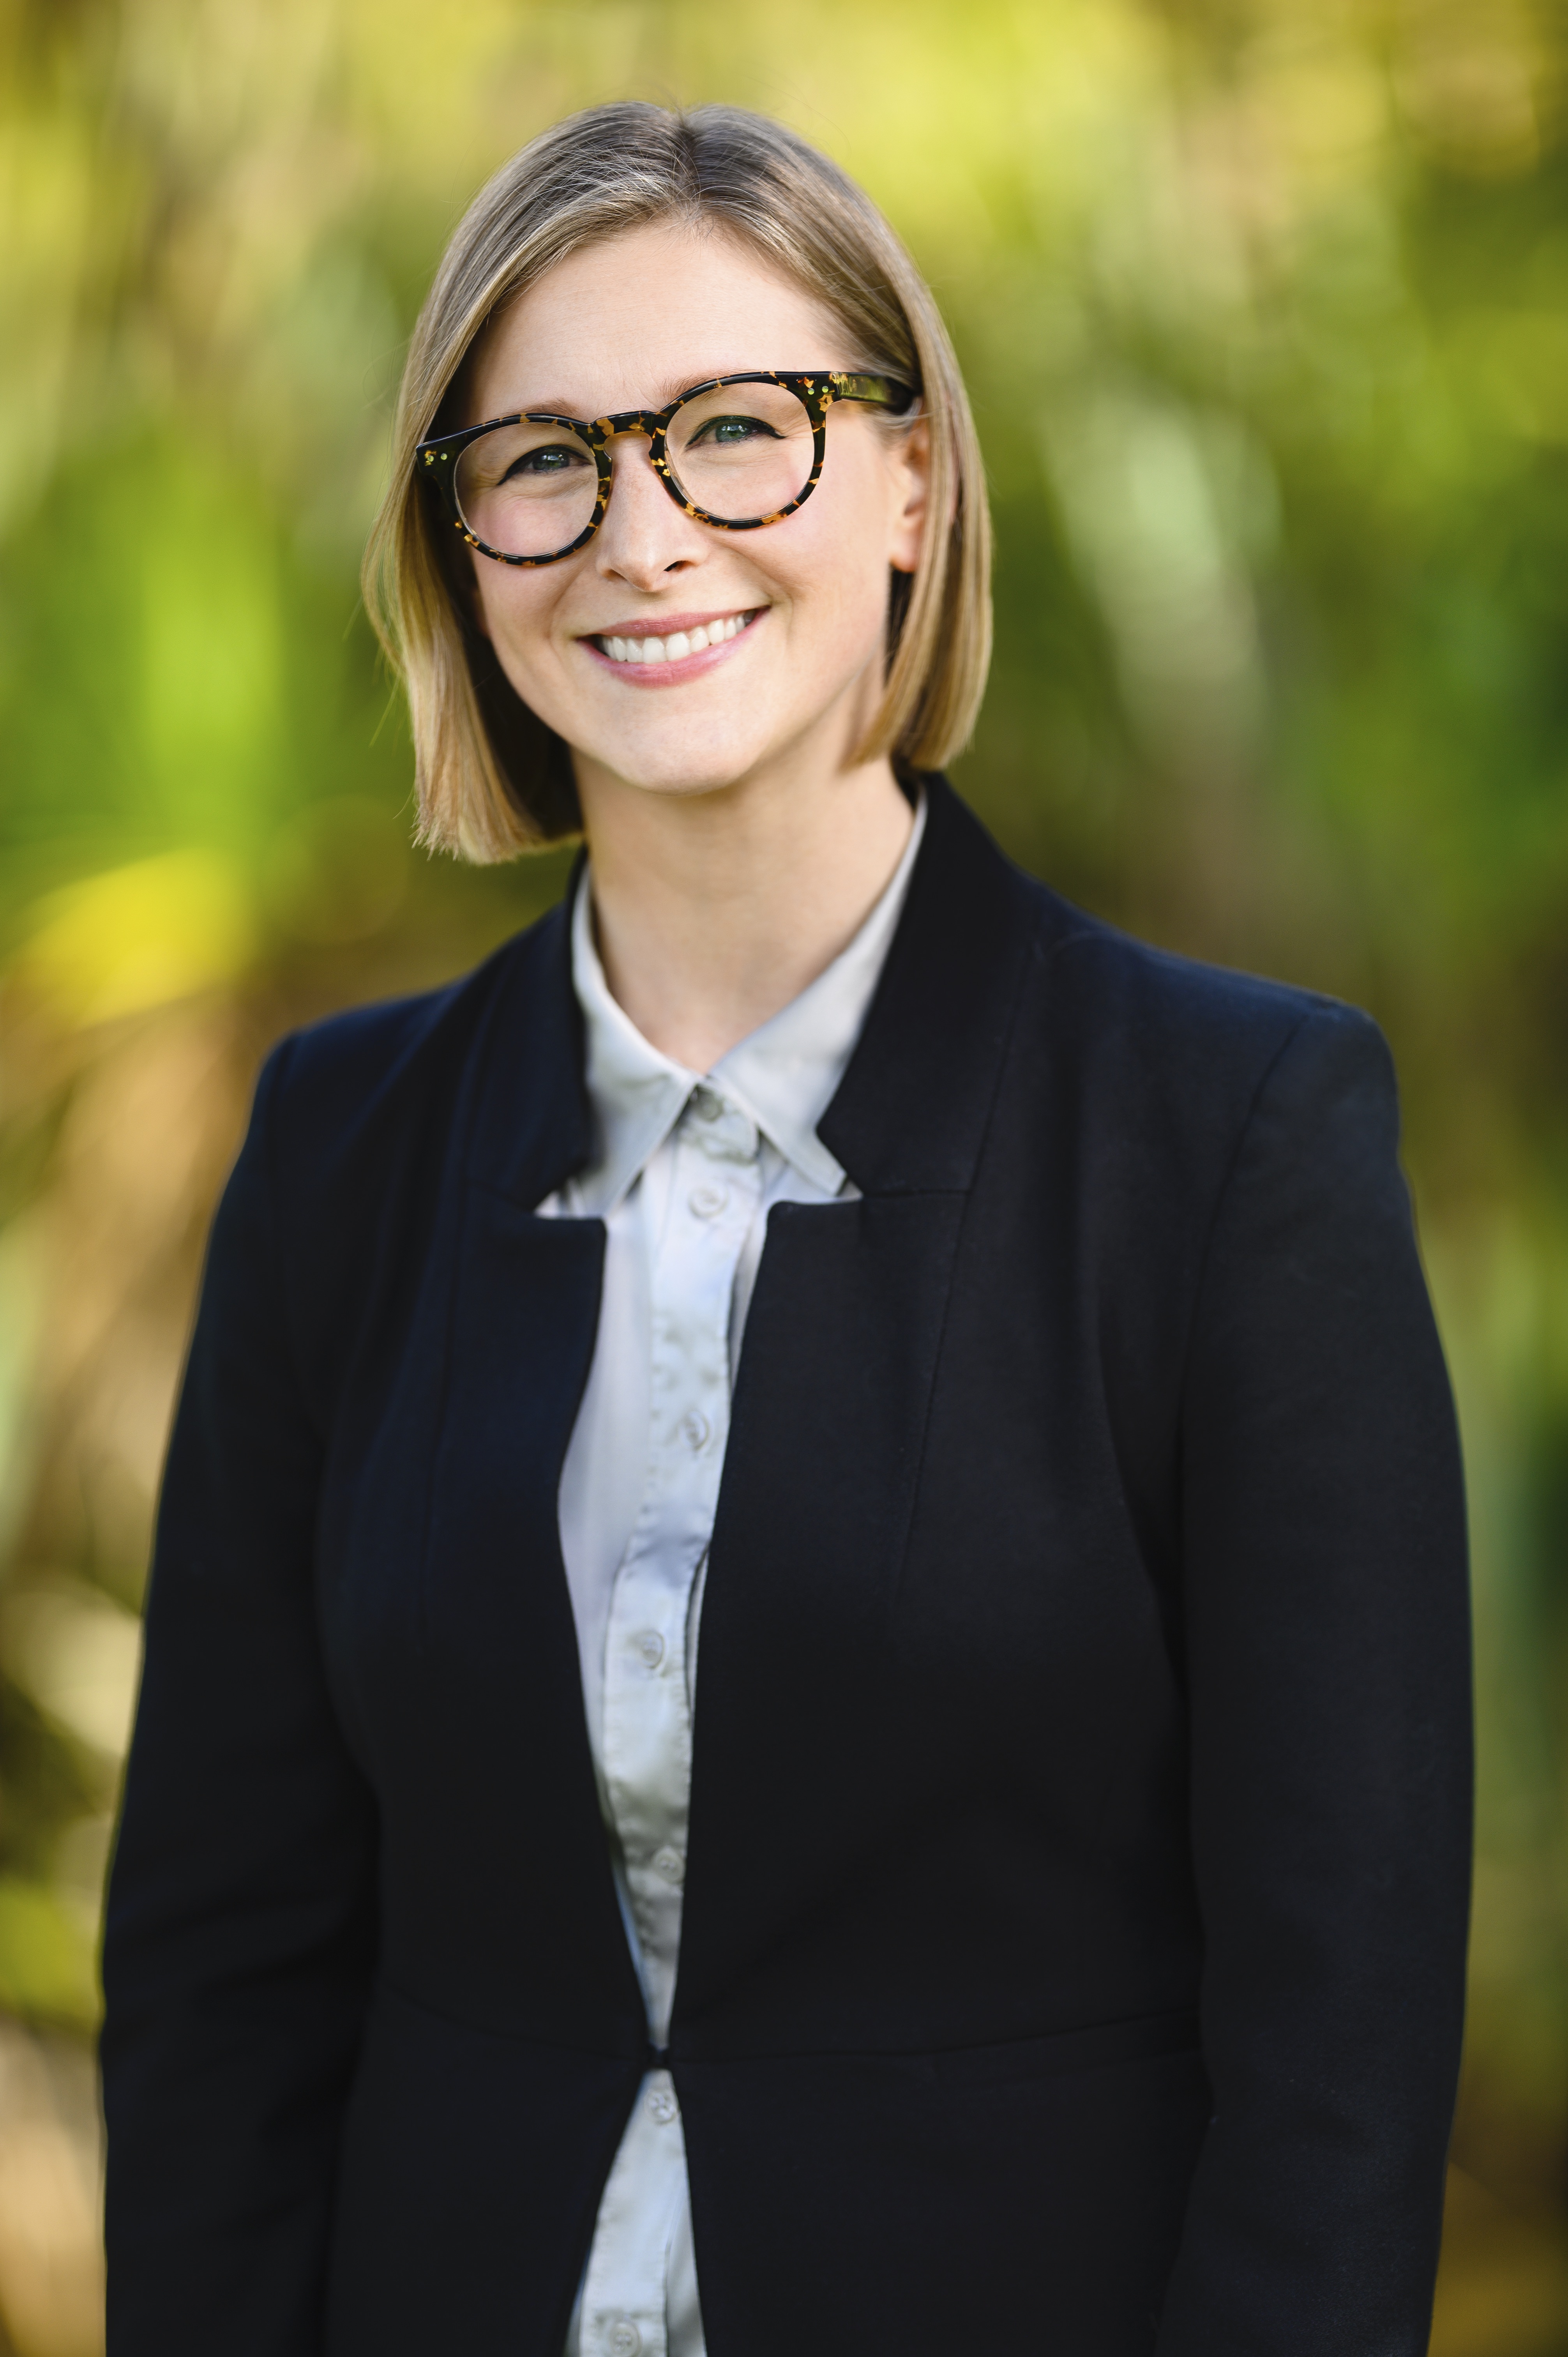 Greens state candidate Sarah Dekiere stands against a background of trees.